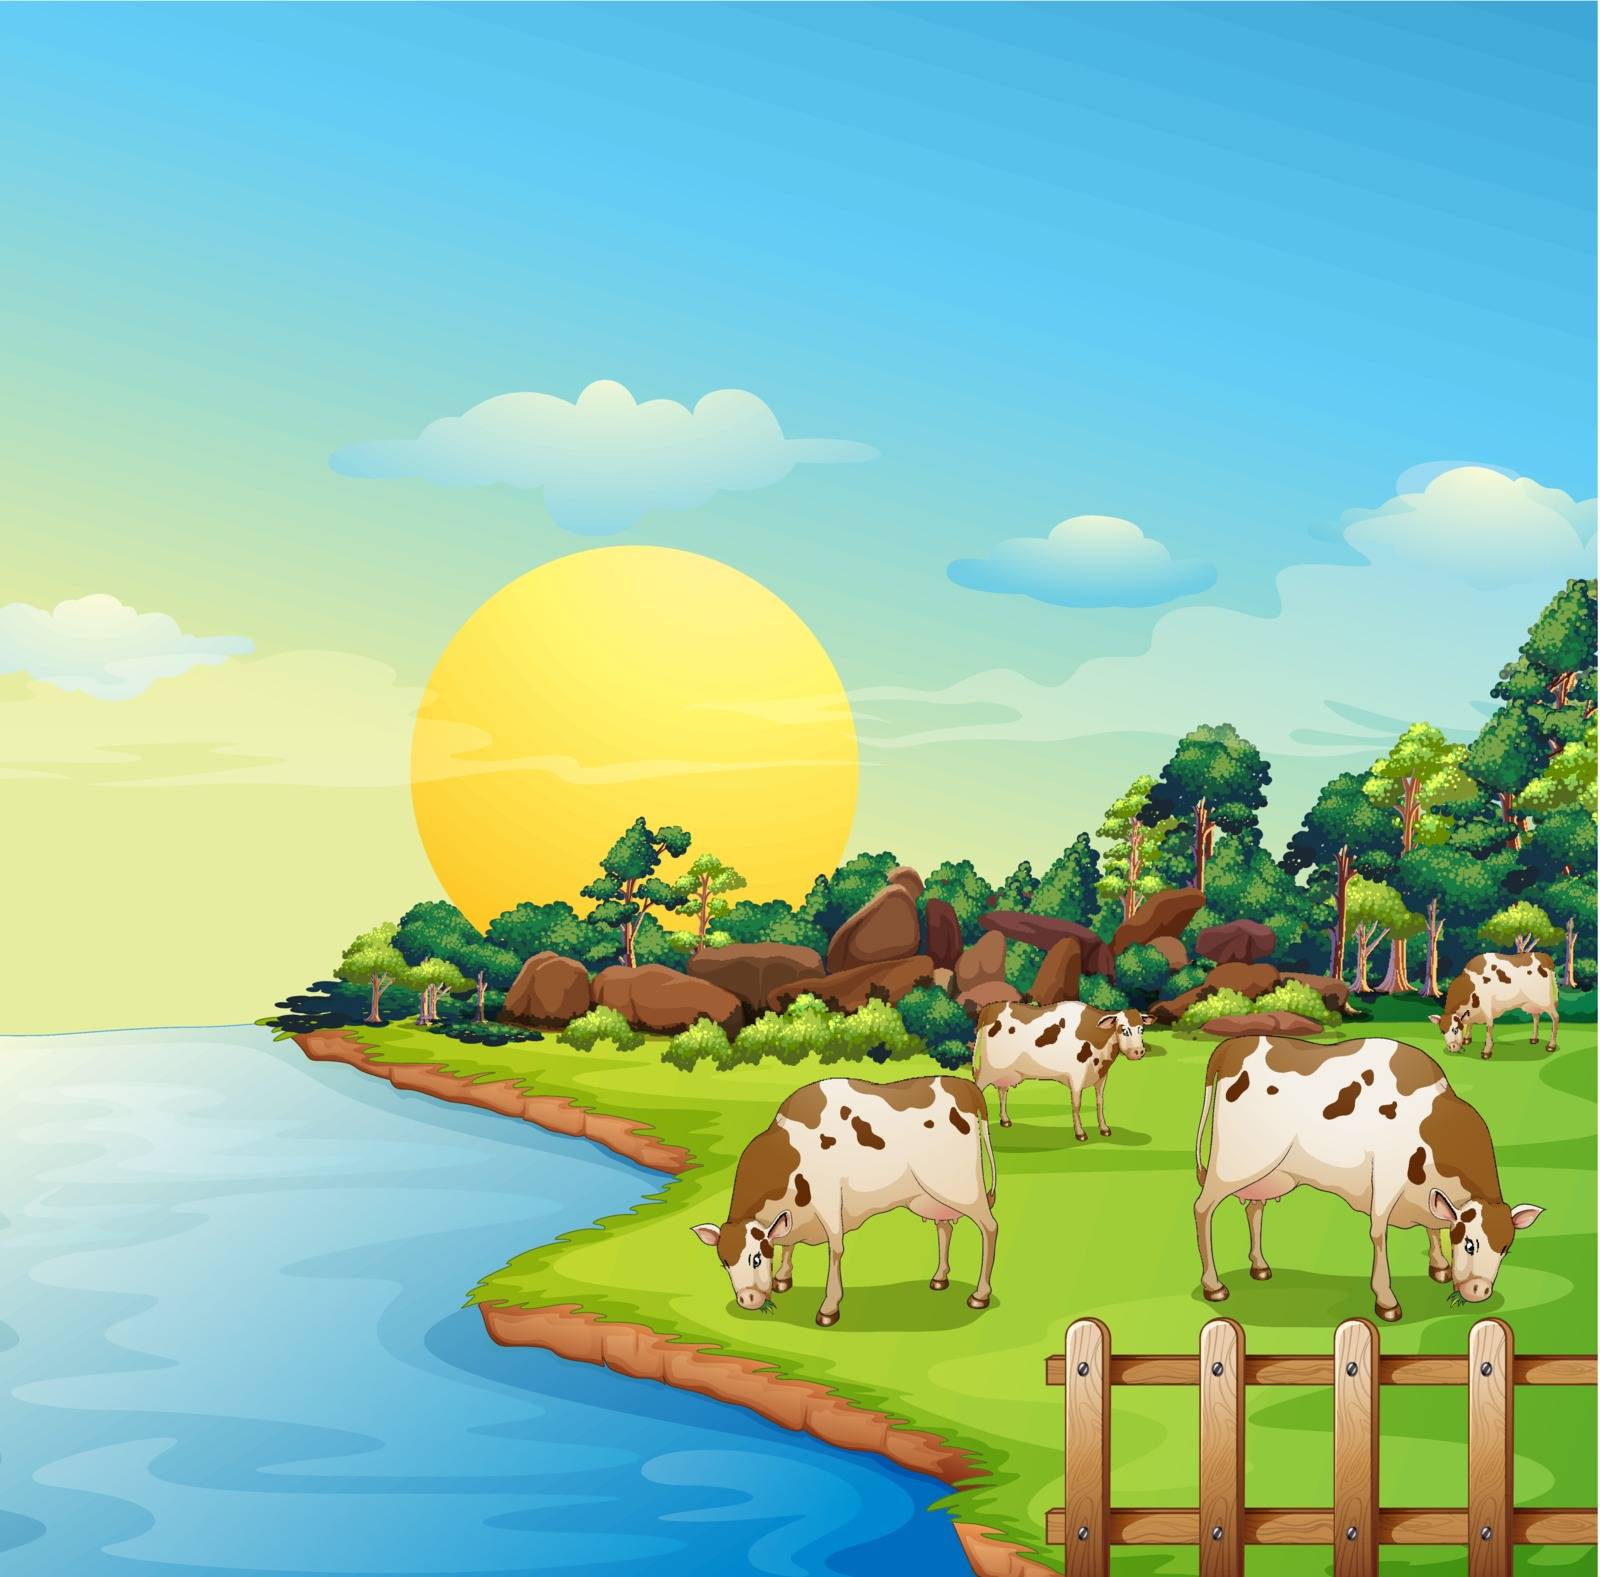 Illustration of the cows at the farm